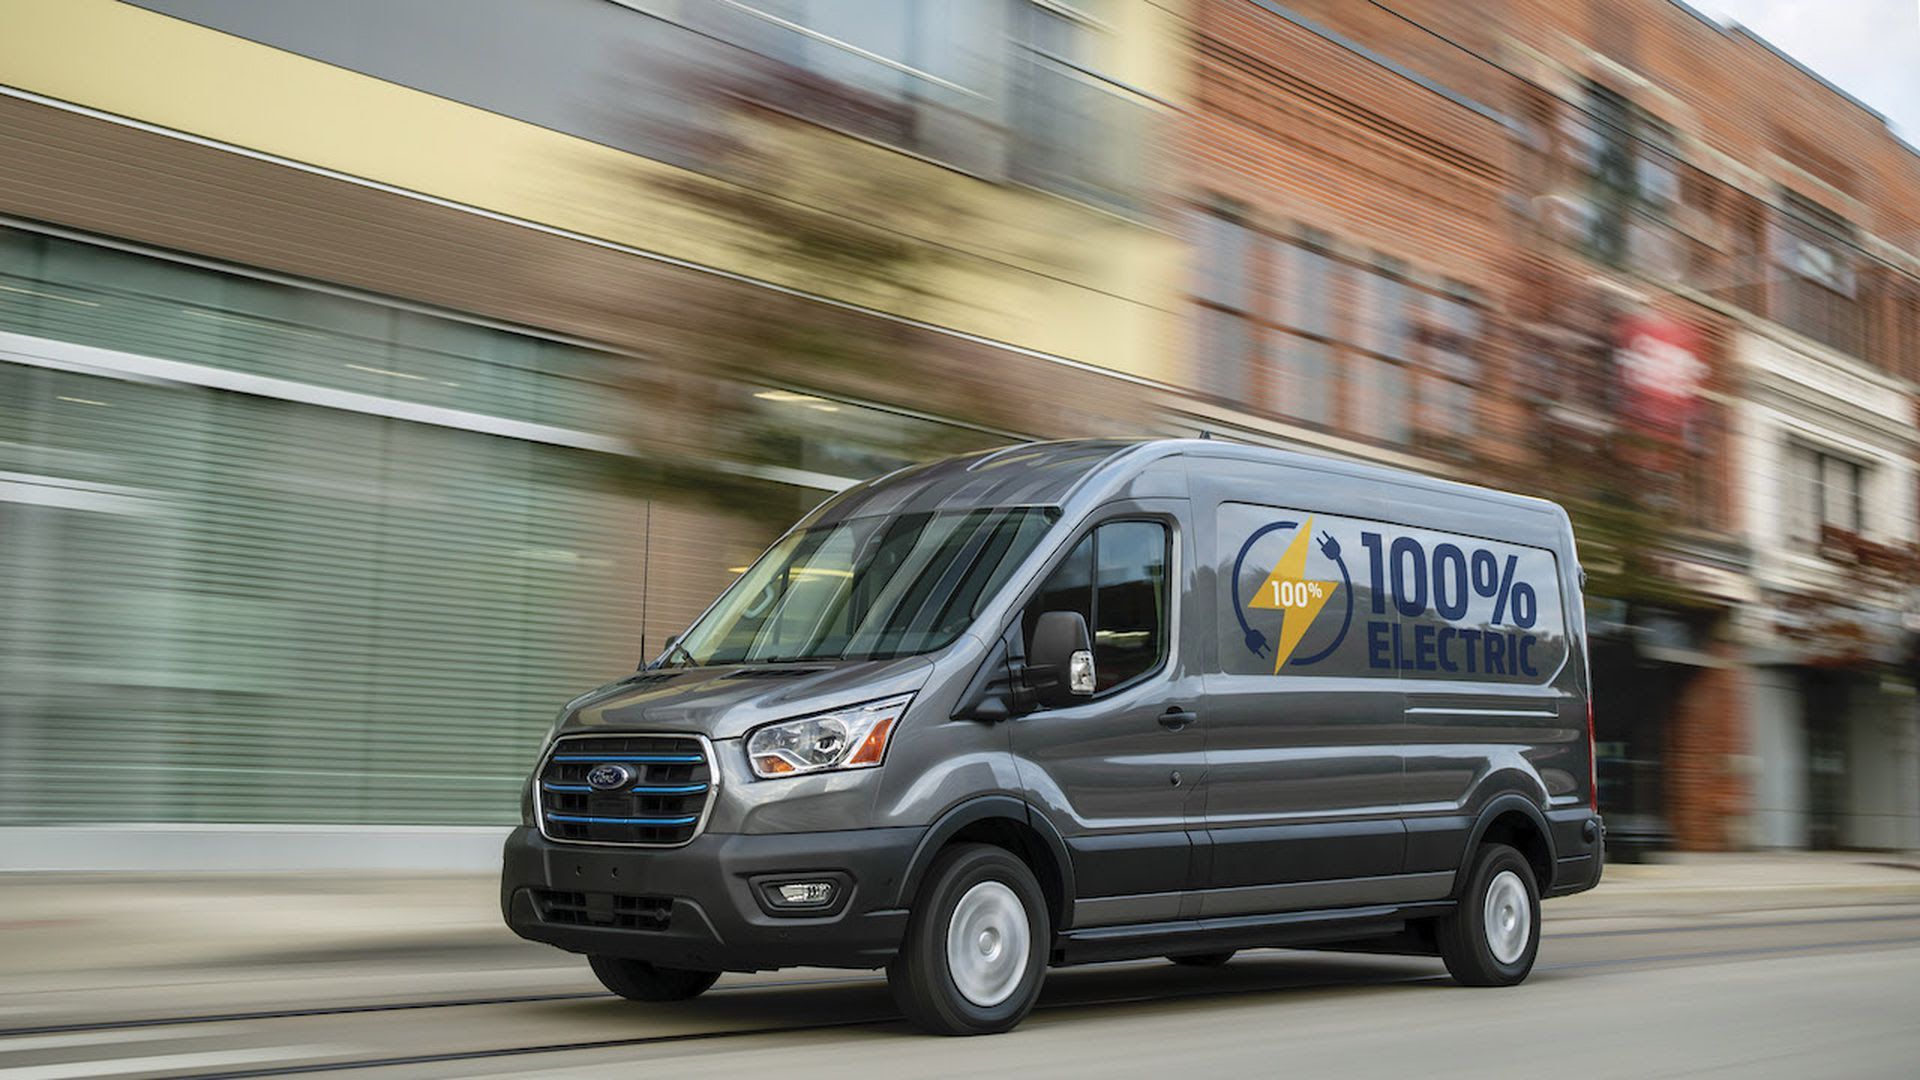 The Ford E-Transit van. Courtesy of Ford